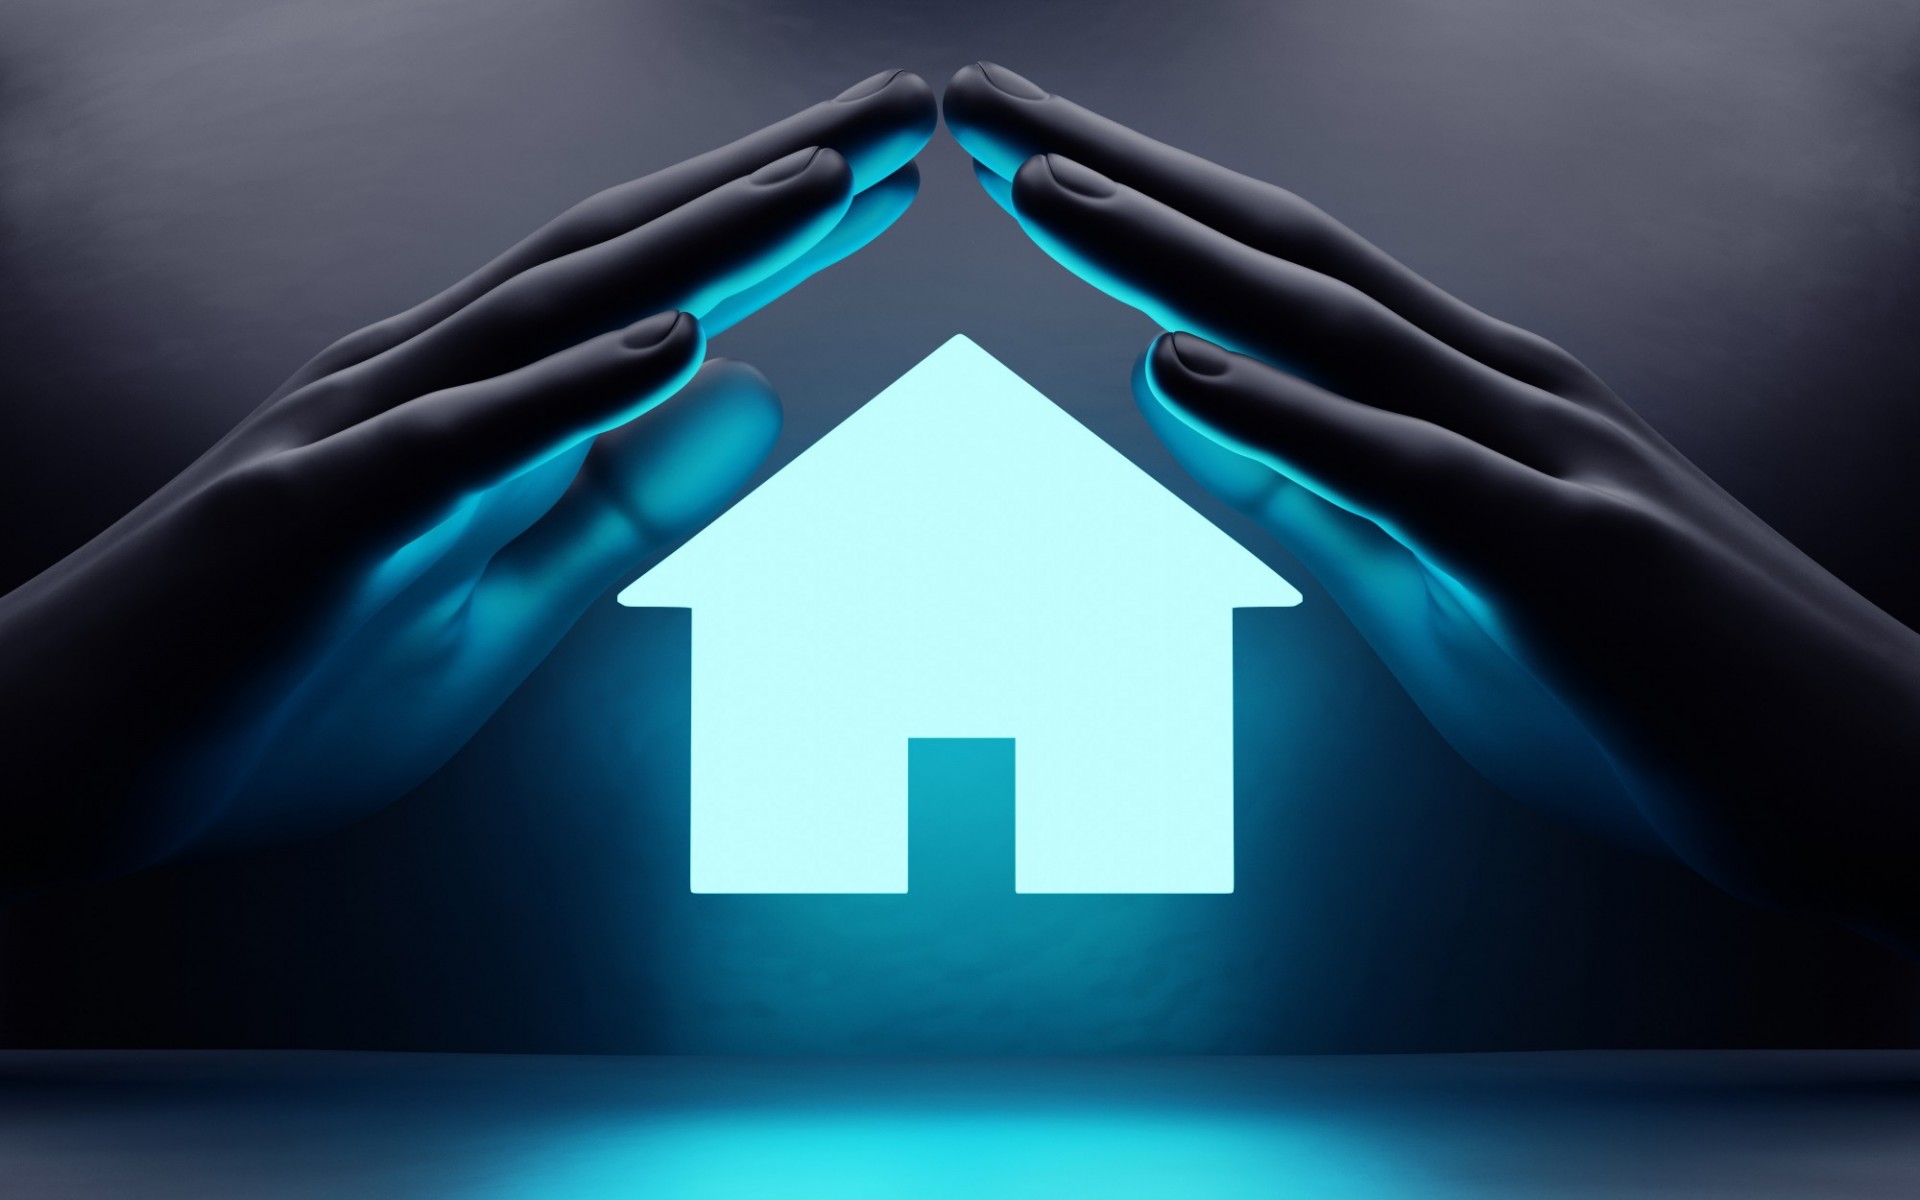 outline of an electric blue house floating with pair of dark hands protecting overhead